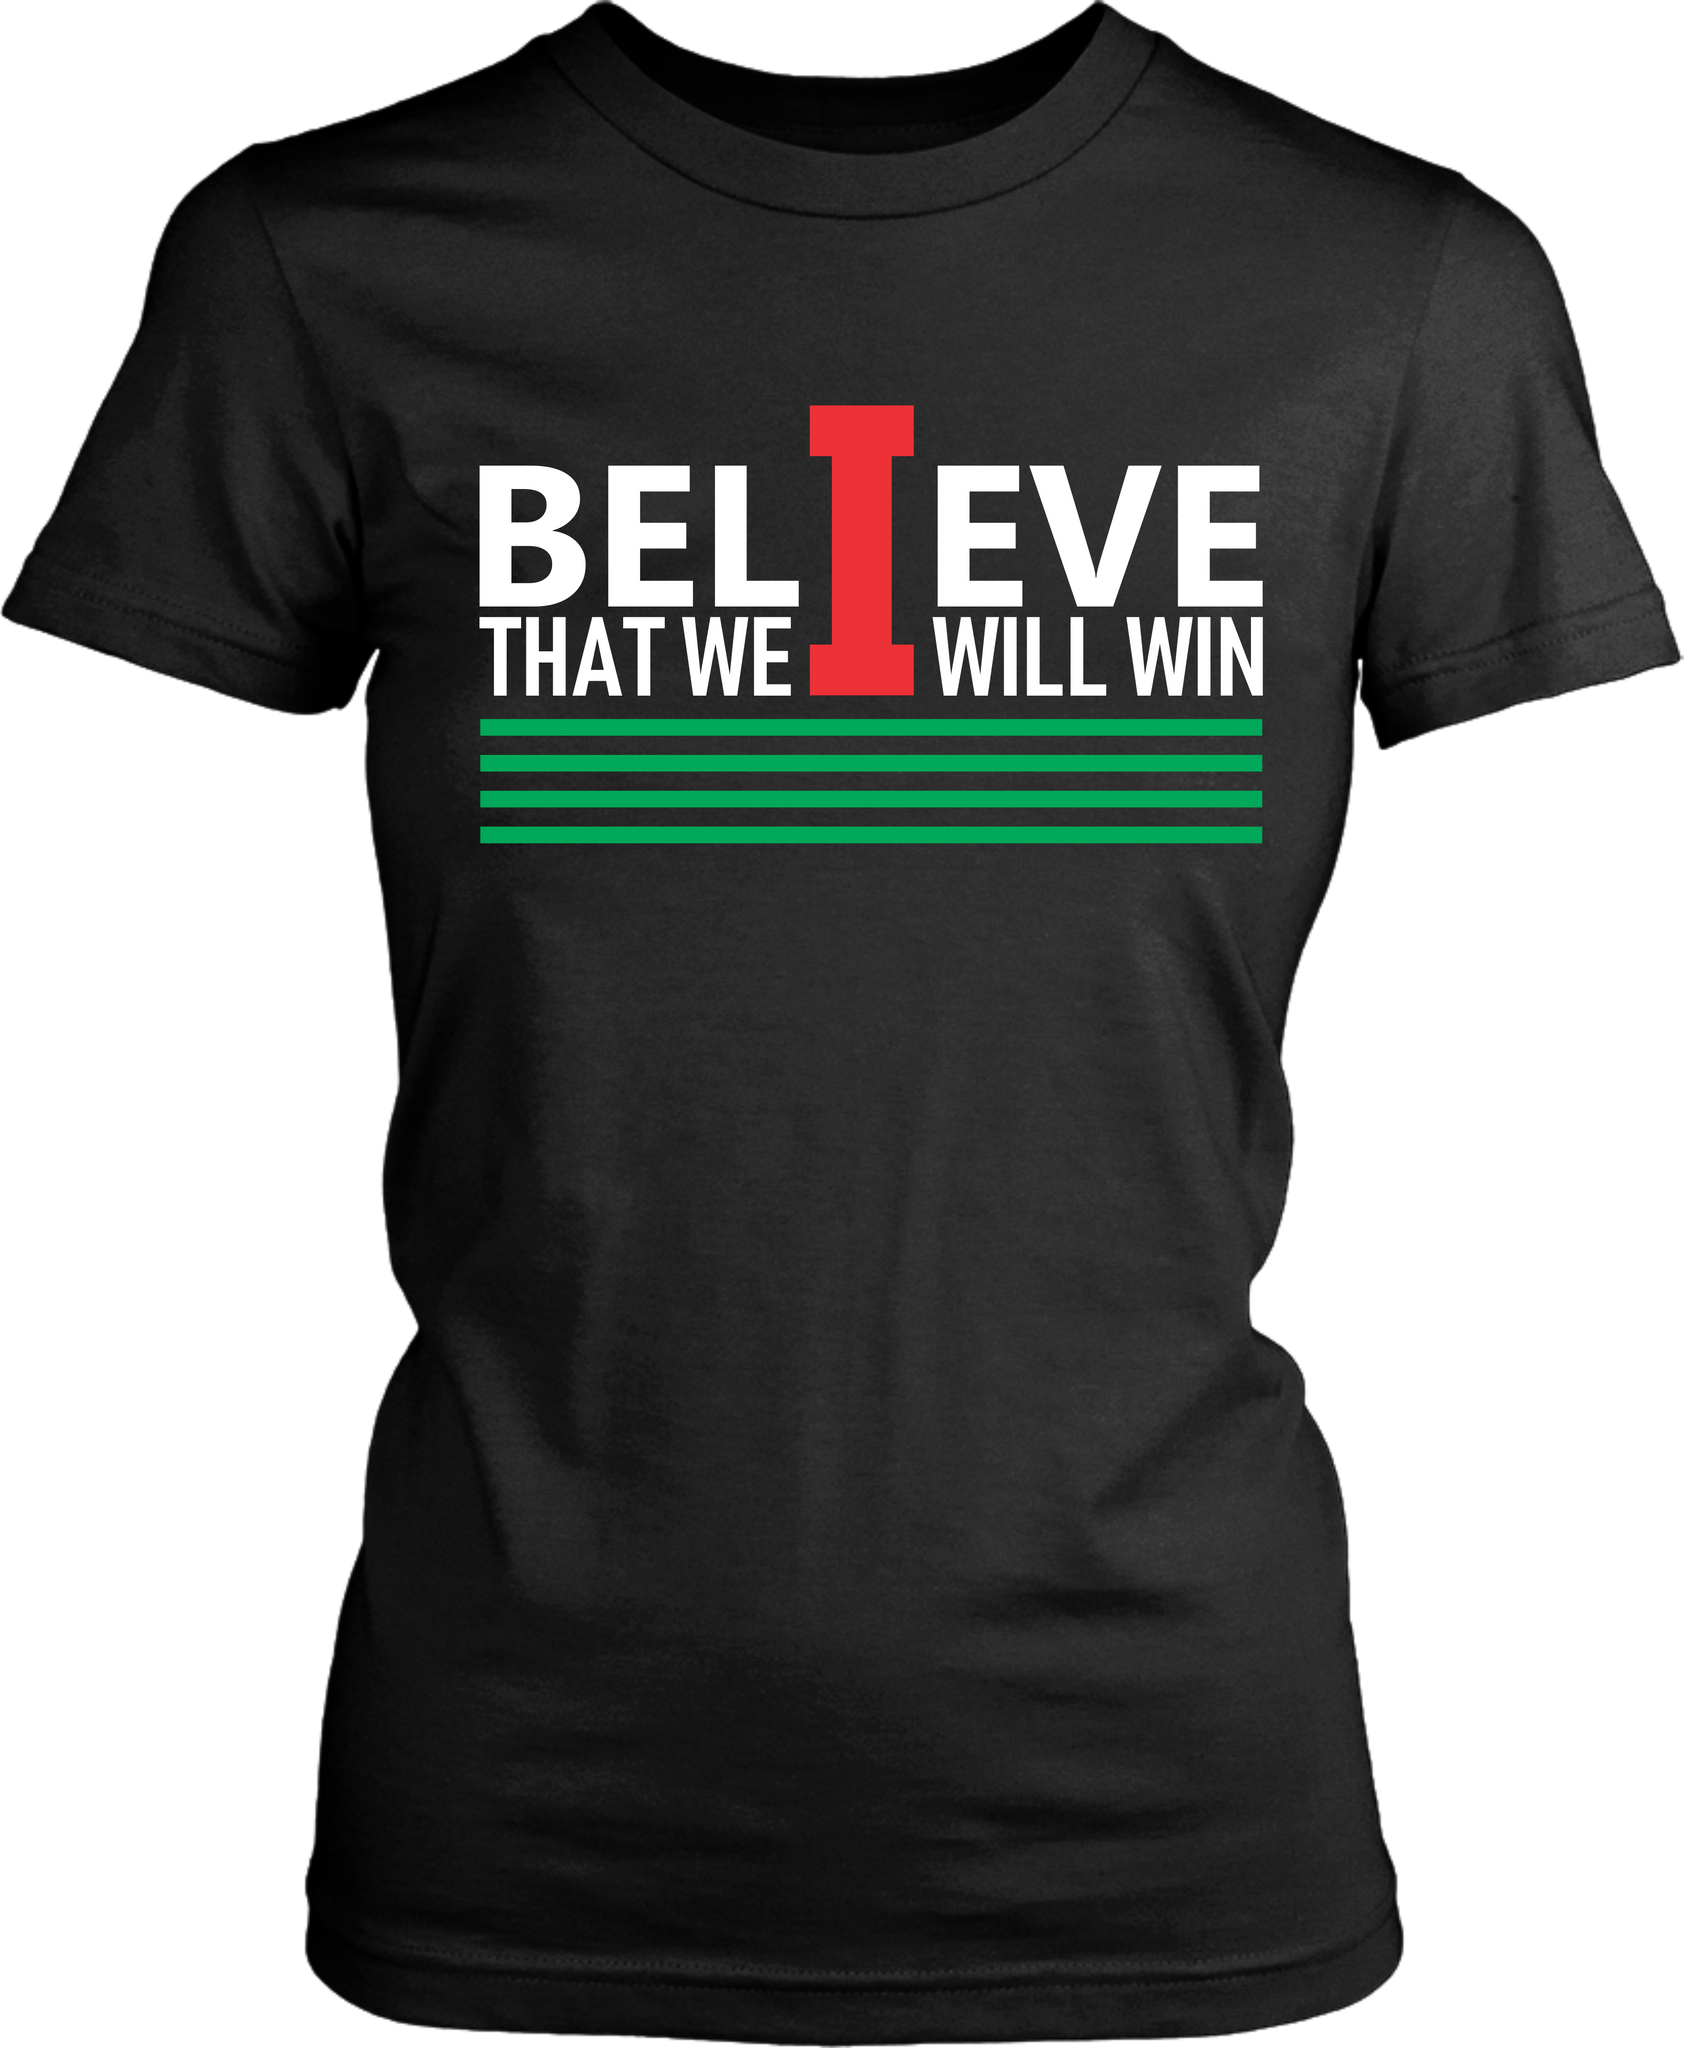 !!! I Believe that we will win***Motivational Quote